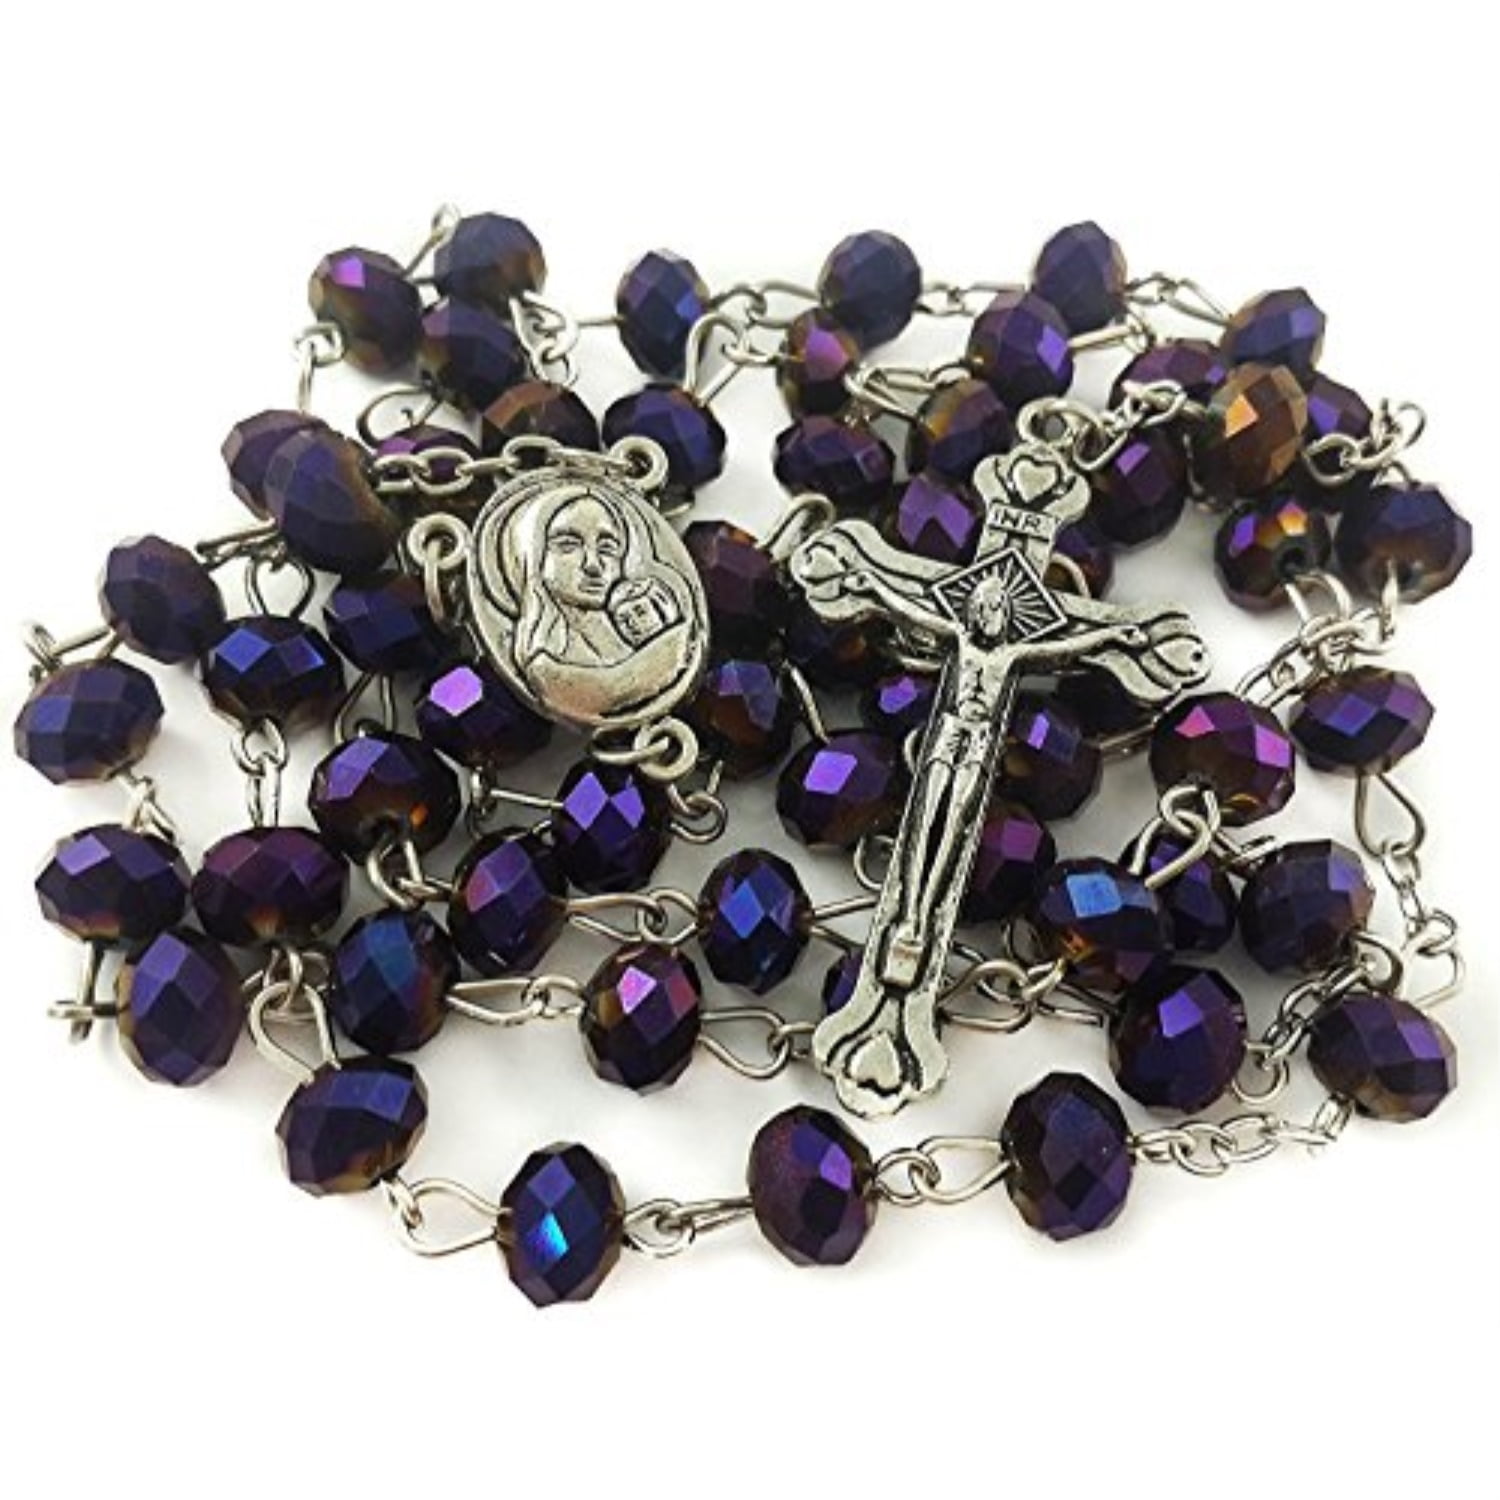 18-Inch Rhodium Plated Necklace with 4mm Light Amethyst Birthstone Beads and Sterling Silver Jerusalem Cross Charm.